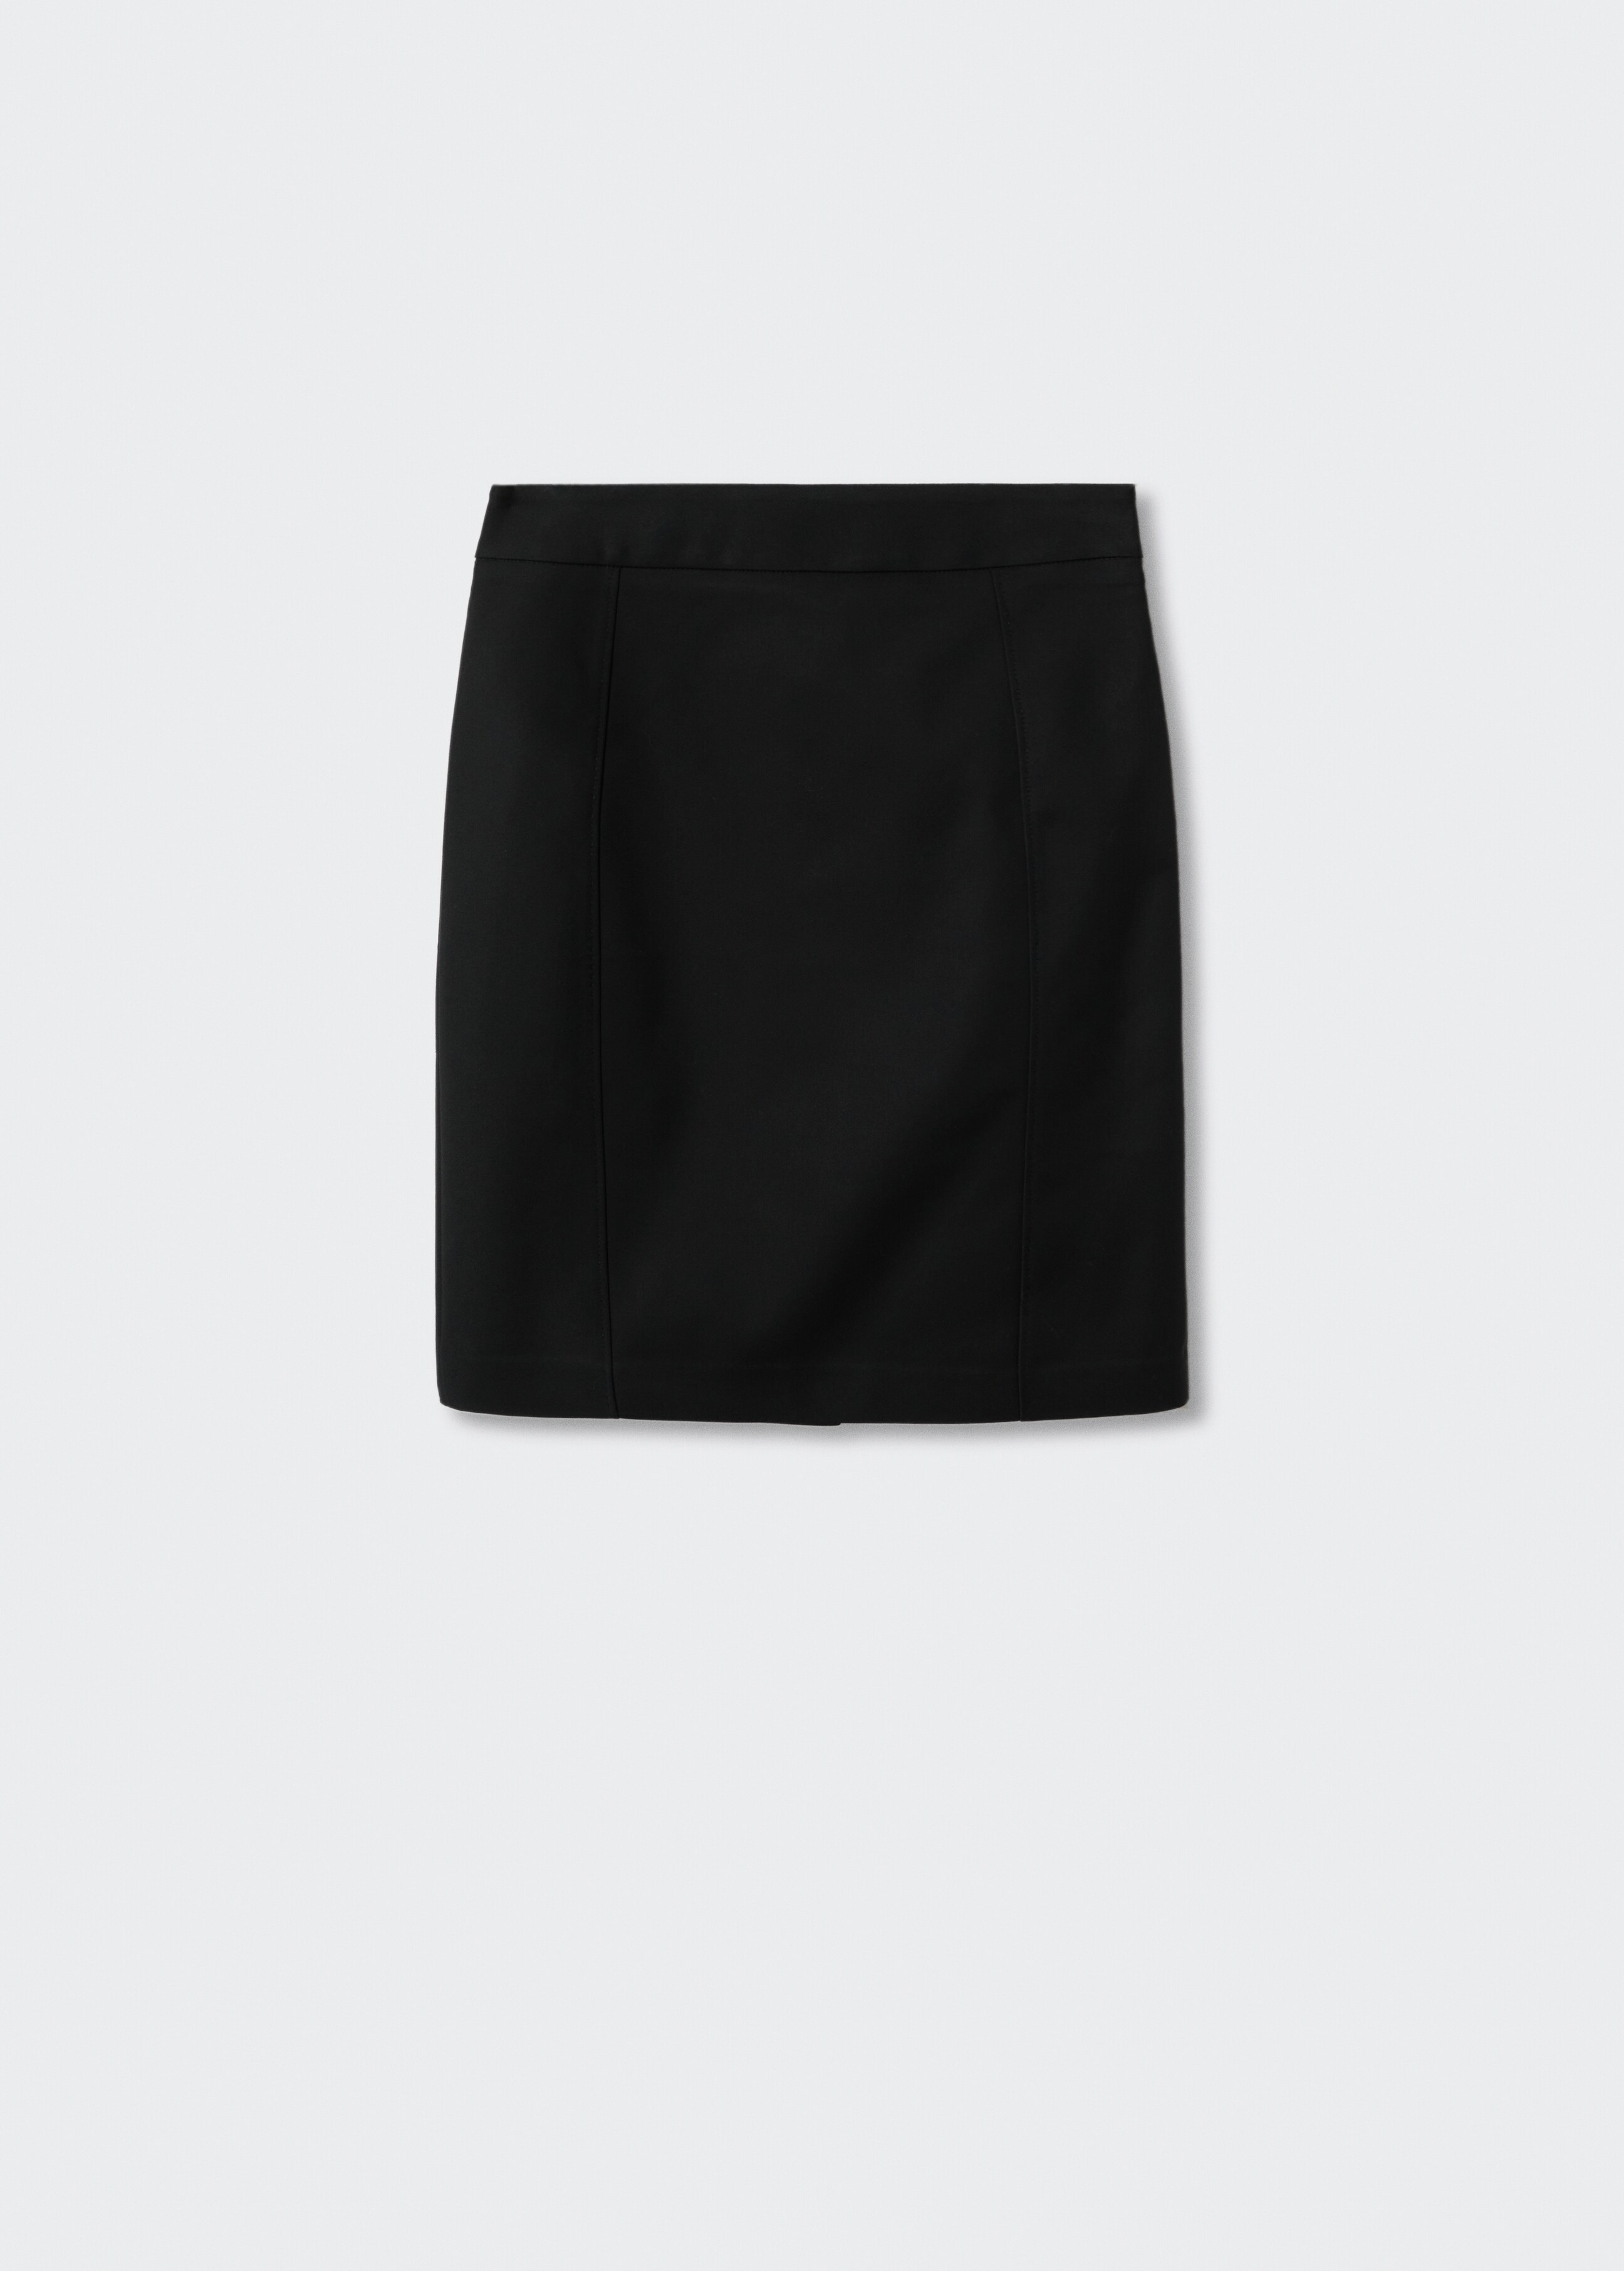 Suit pencil skirt - Article without model